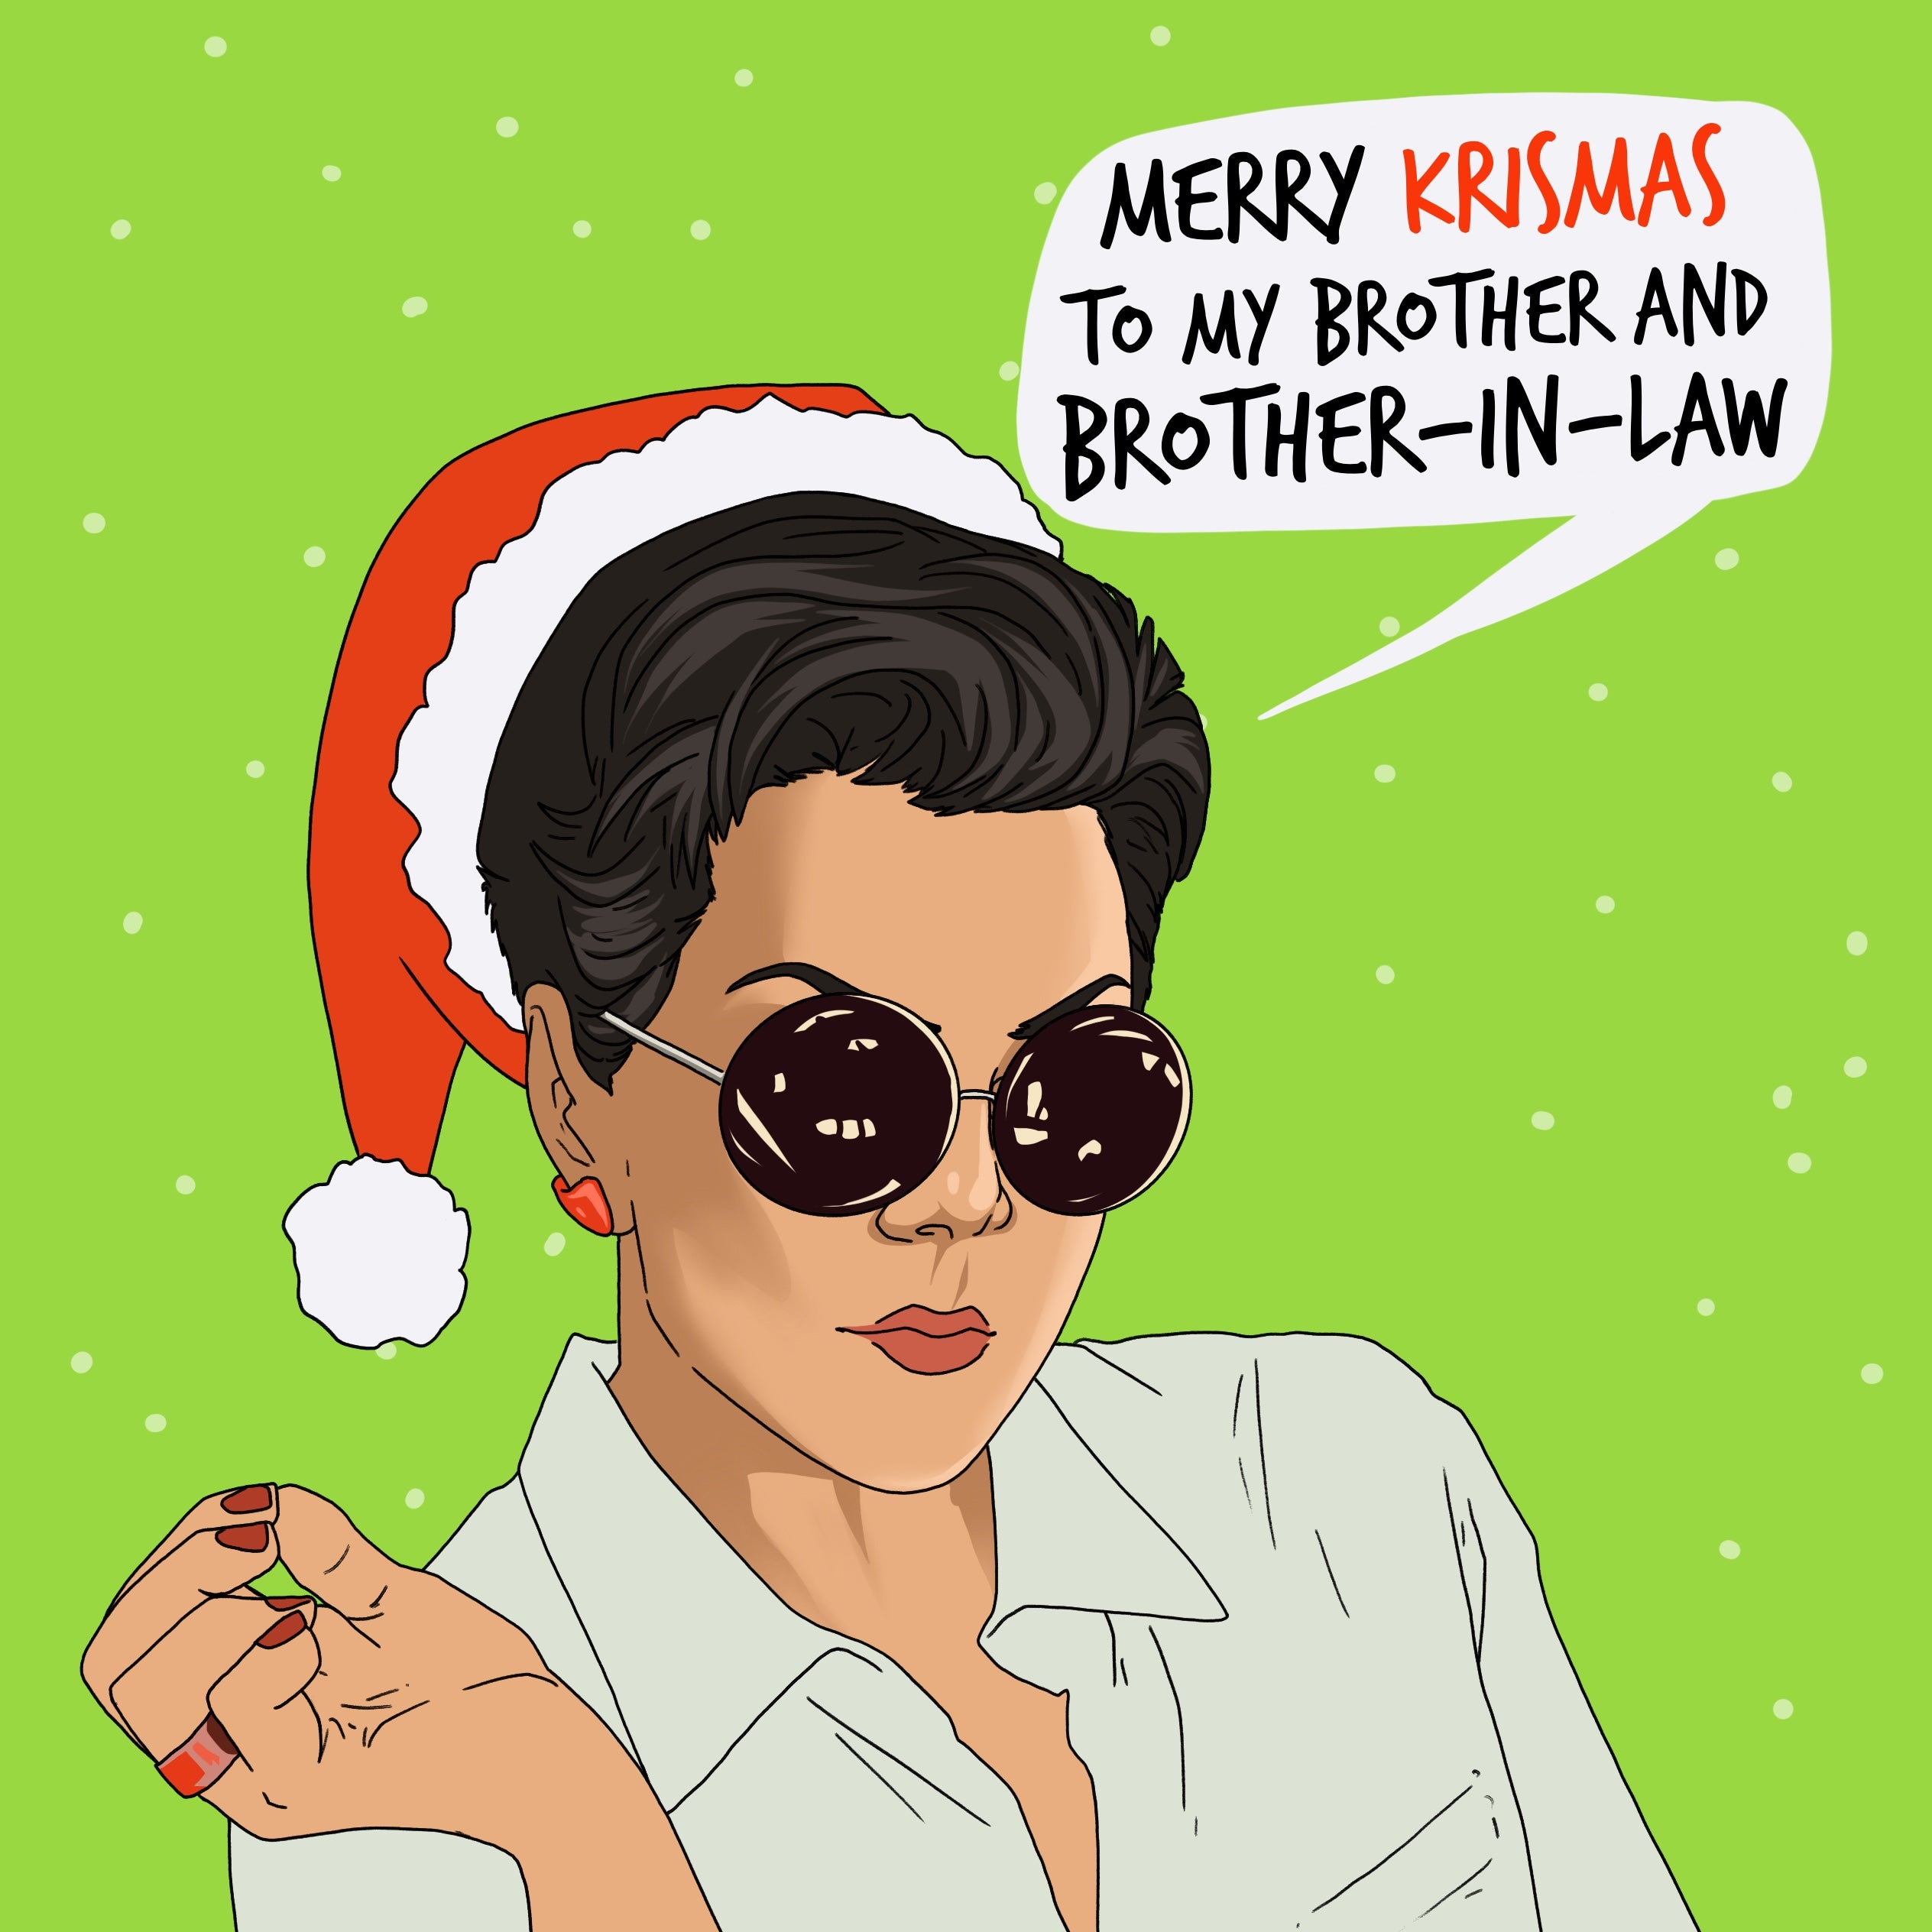 Merry Krismas Brother And Brother-in-law Kris Jenner Card | Boomf